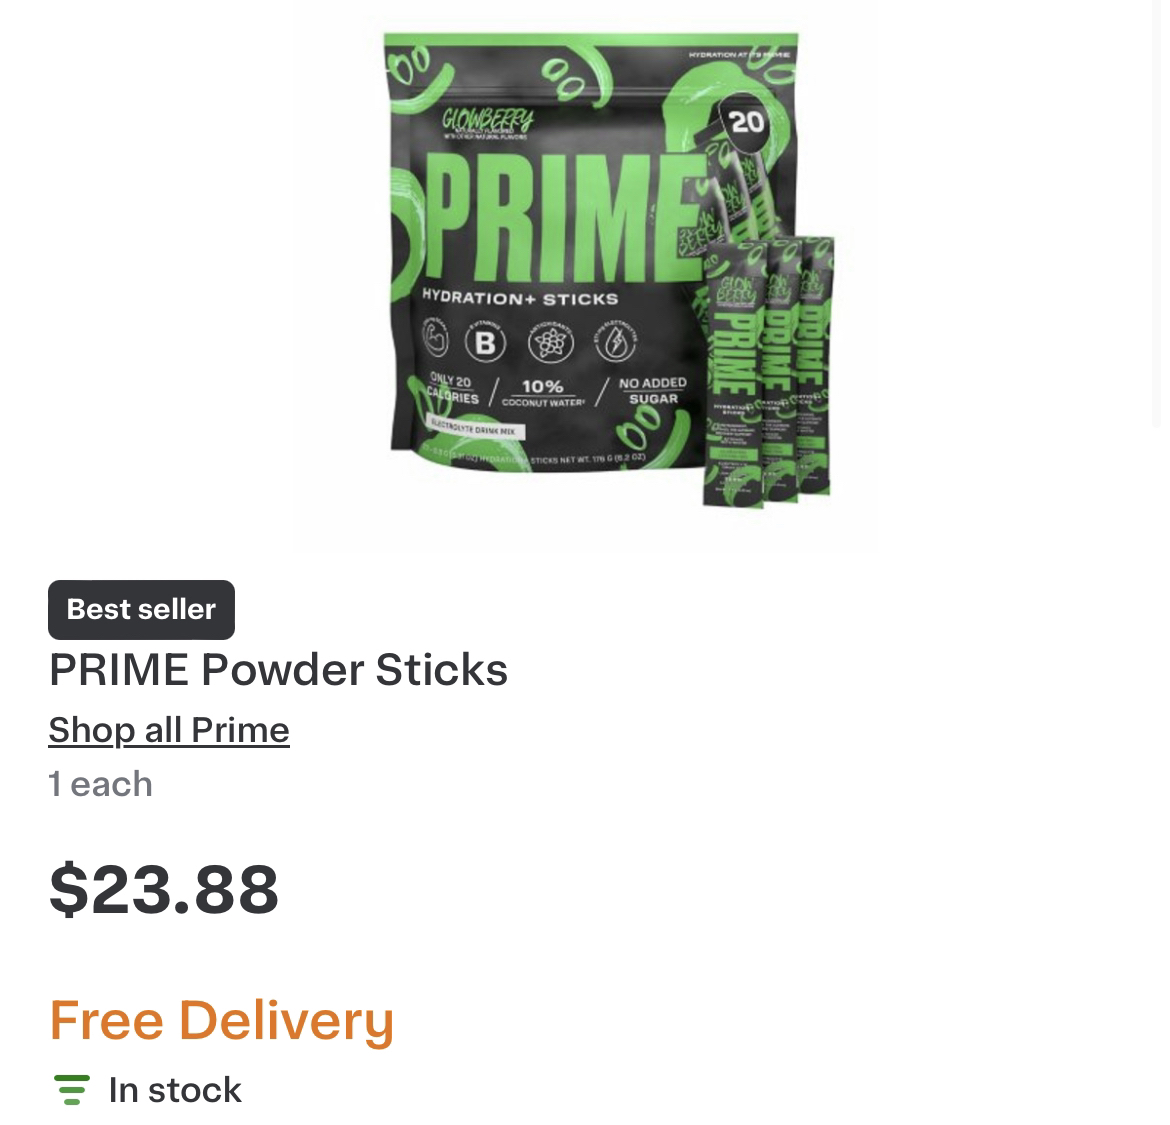 PRIME Tracker on X: 🍏 GLOWBERRY STICKS 20PK 🍏 Sam's Club continually  keeps giving - they've listed a 20pk of Glowberry Sticks! What a HUGE day.  It doesn't stop here We'll be